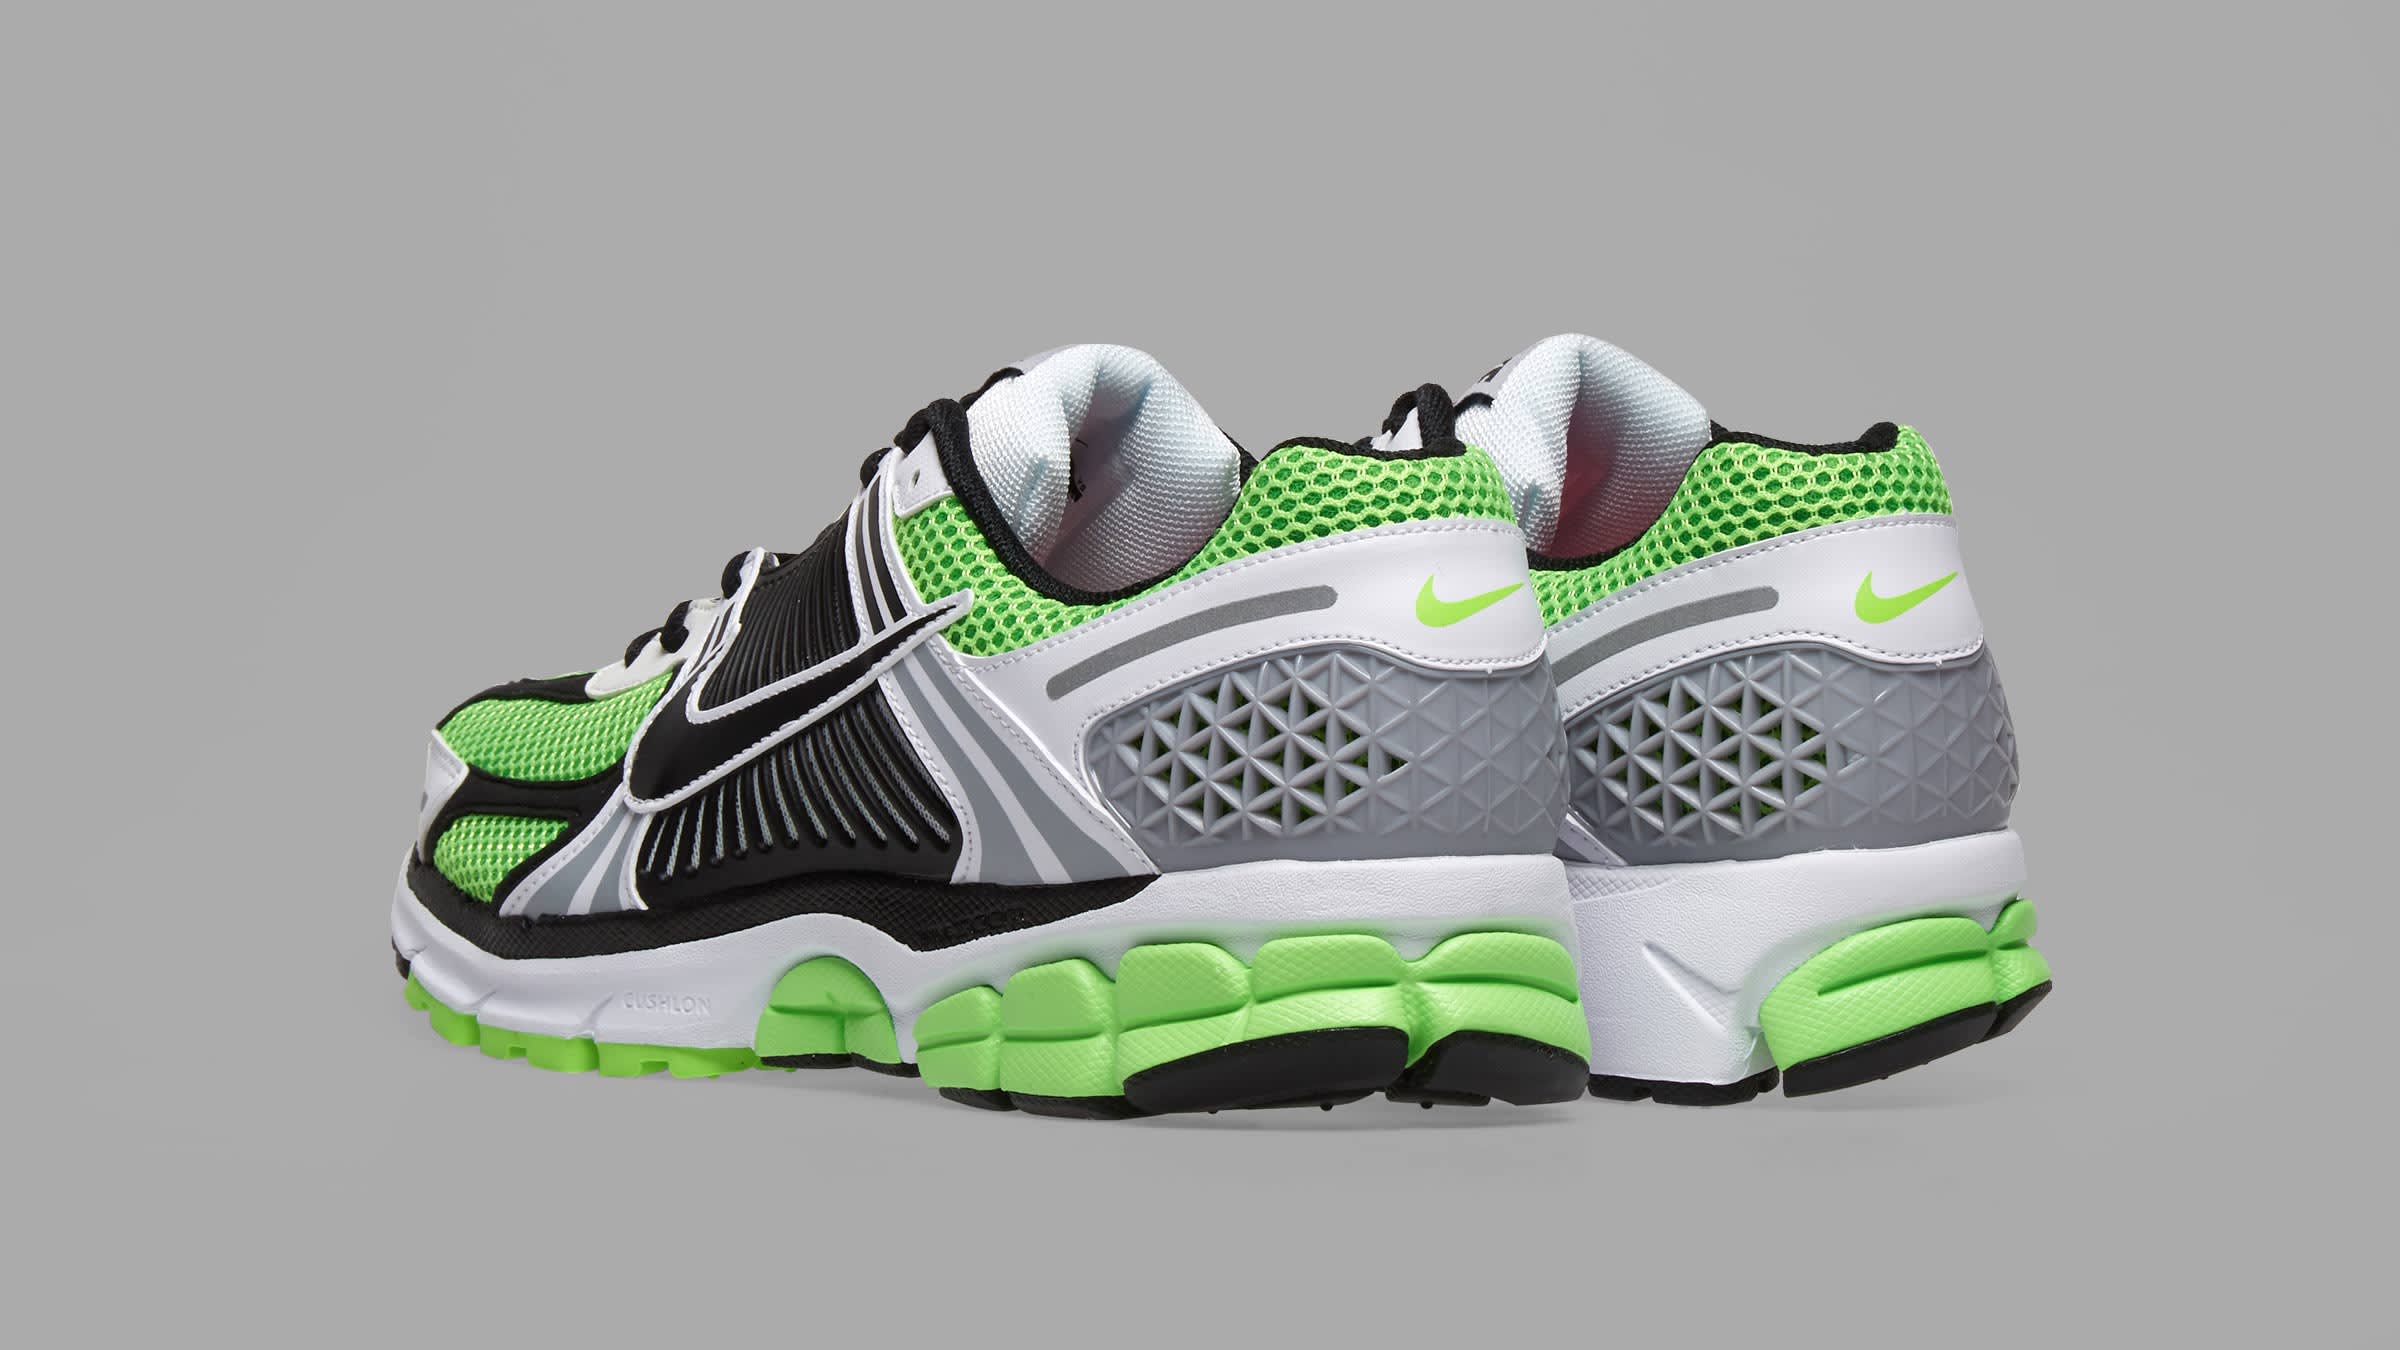 Nike Zoom Vomero 5 SE SP (Electric Green, Black & Sail) | END. Launches